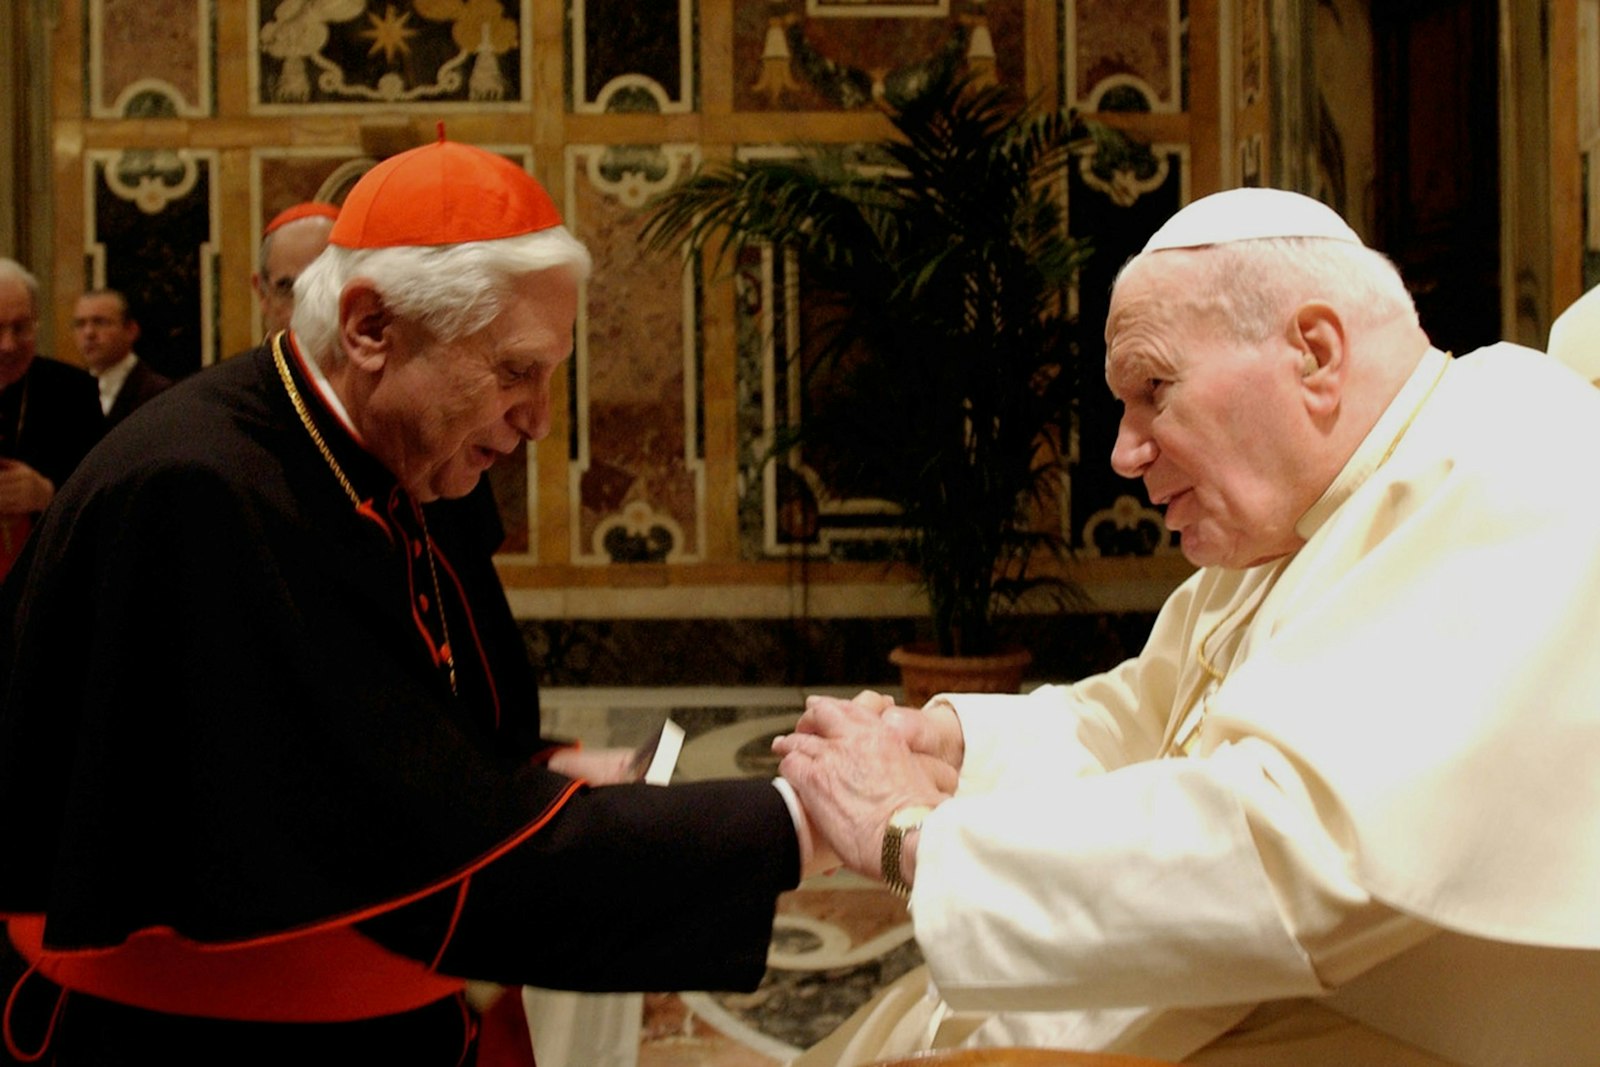 Cardinal Joseph Ratzinger, who later became Pope Benedict XVI, greets Pope John Paul II during a 2004 ceremony at the Vatican. Pope Benedict died Dec. 31, 2022, at the age of 95 in his residence at the Vatican. (OSV News photo/Catholic Press Photo)